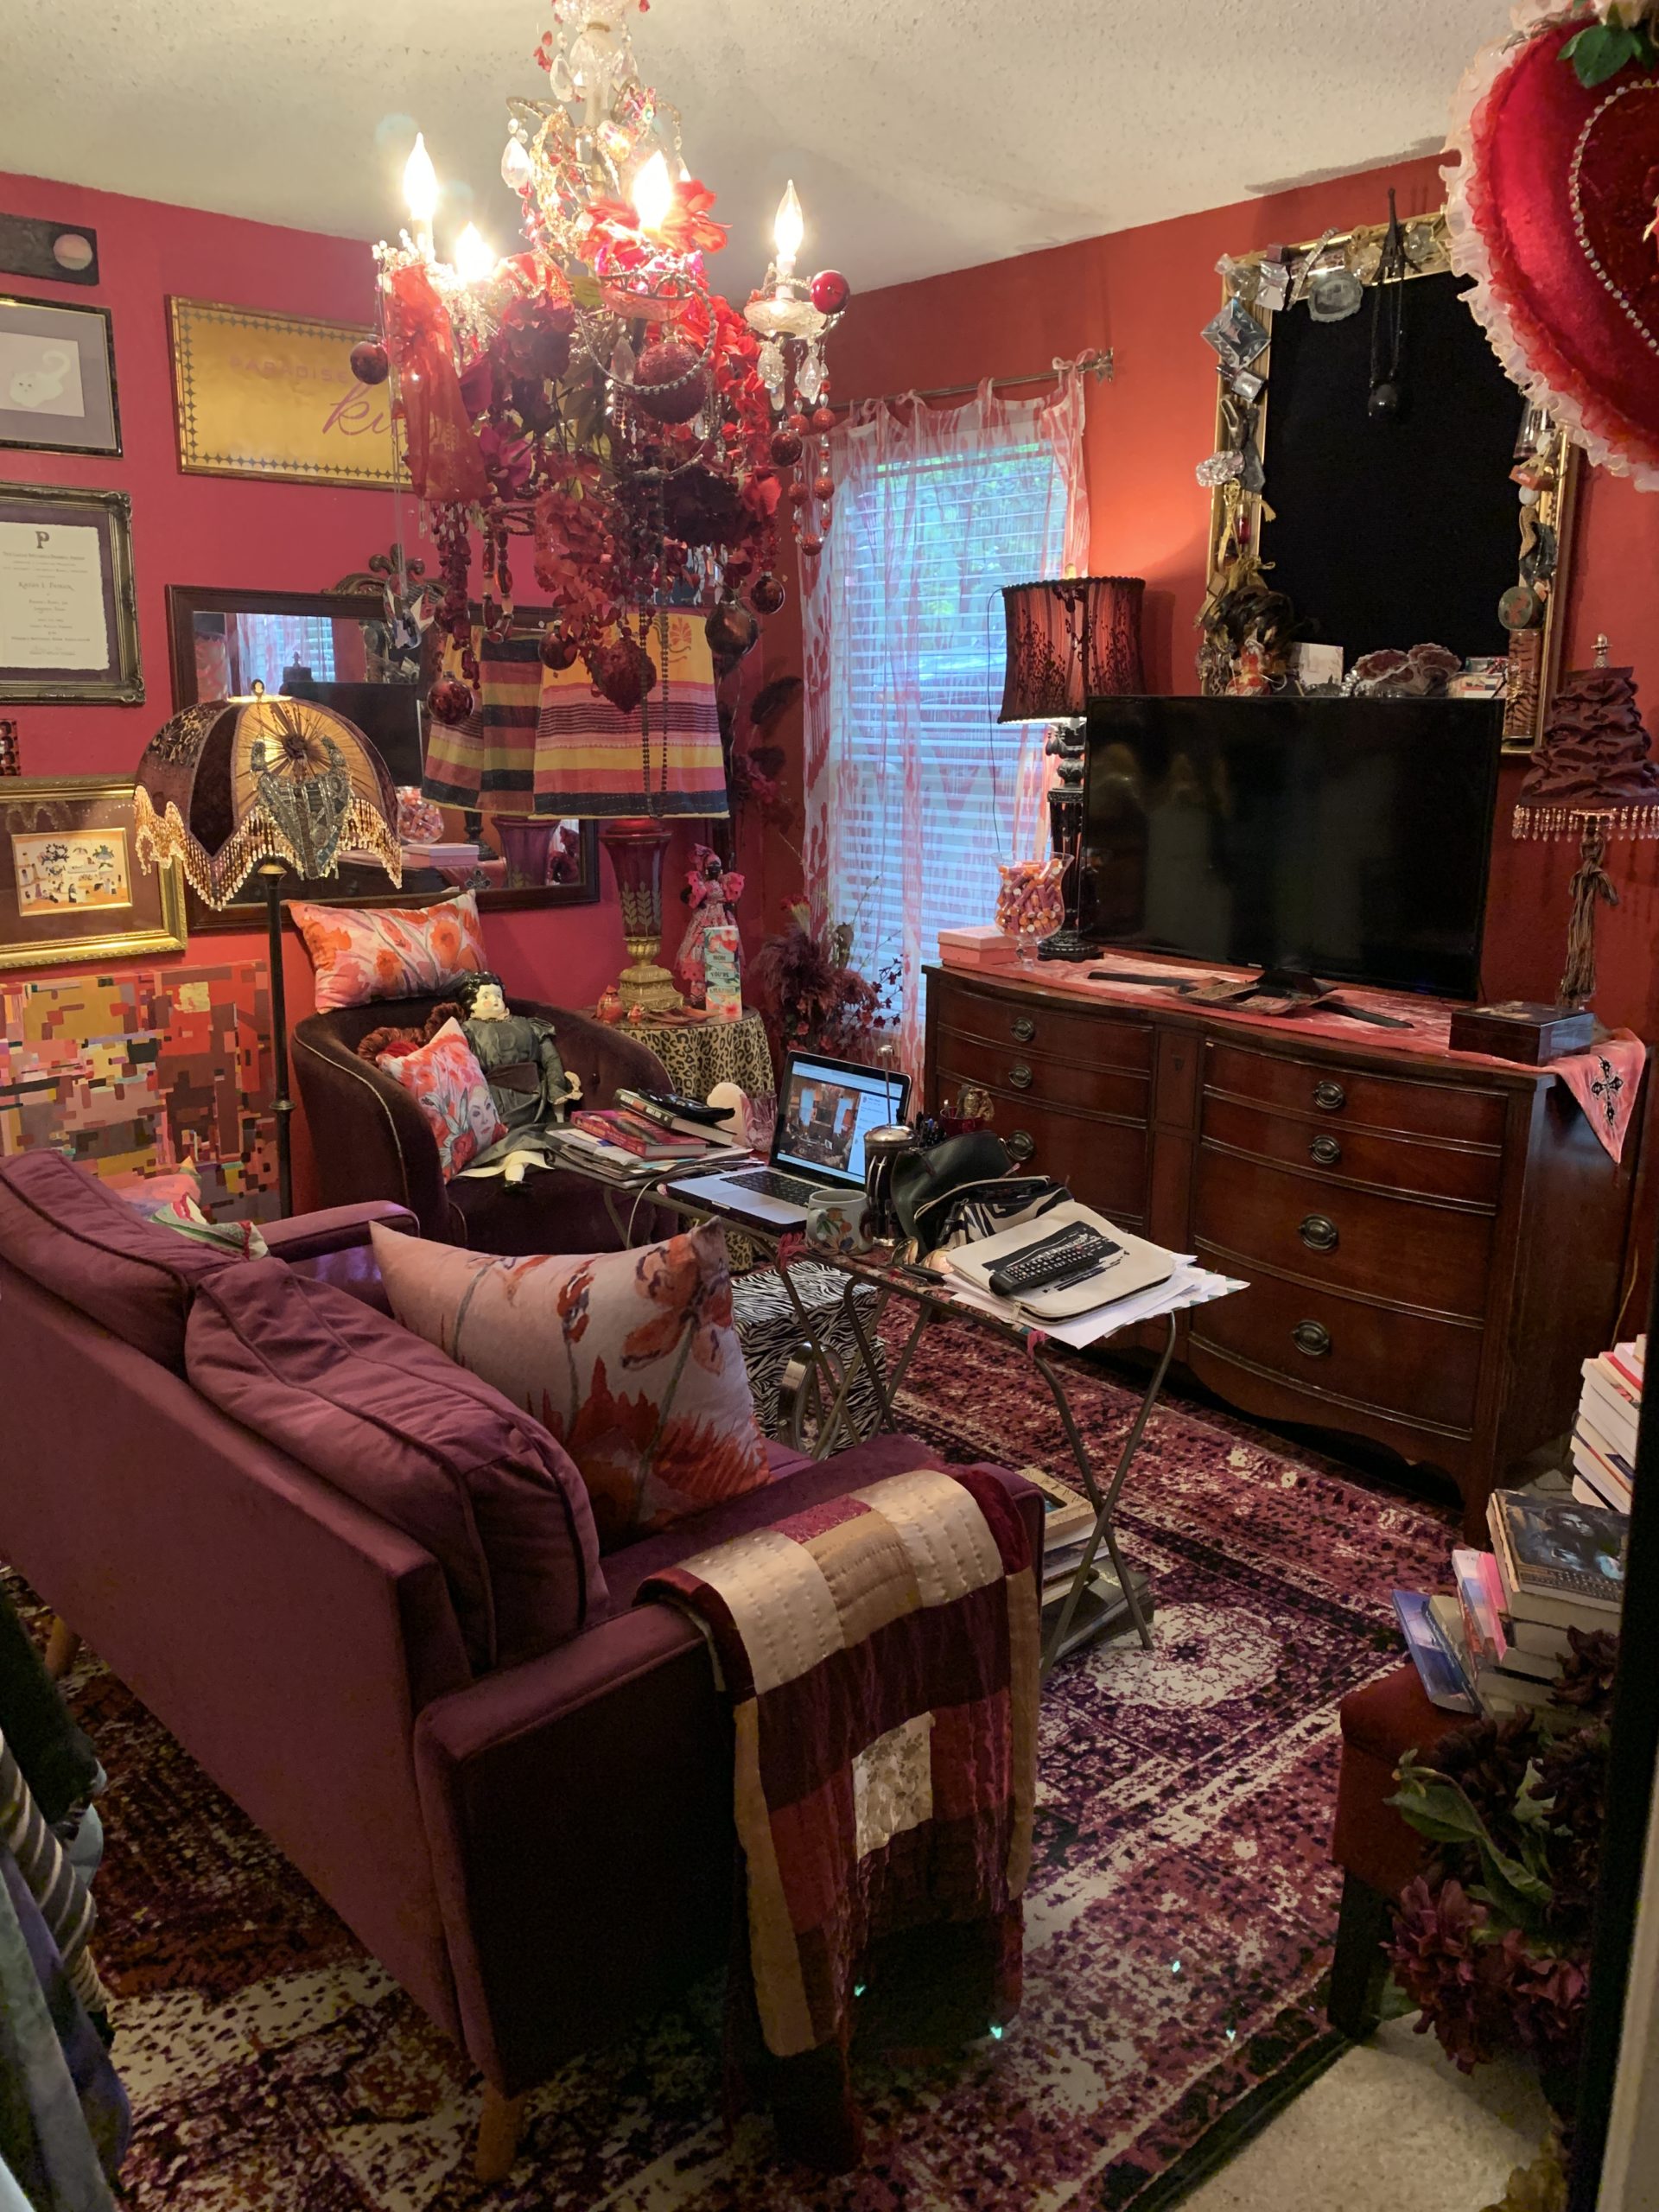 The Pulpwood Queen Shares her Valentine Writing Room!